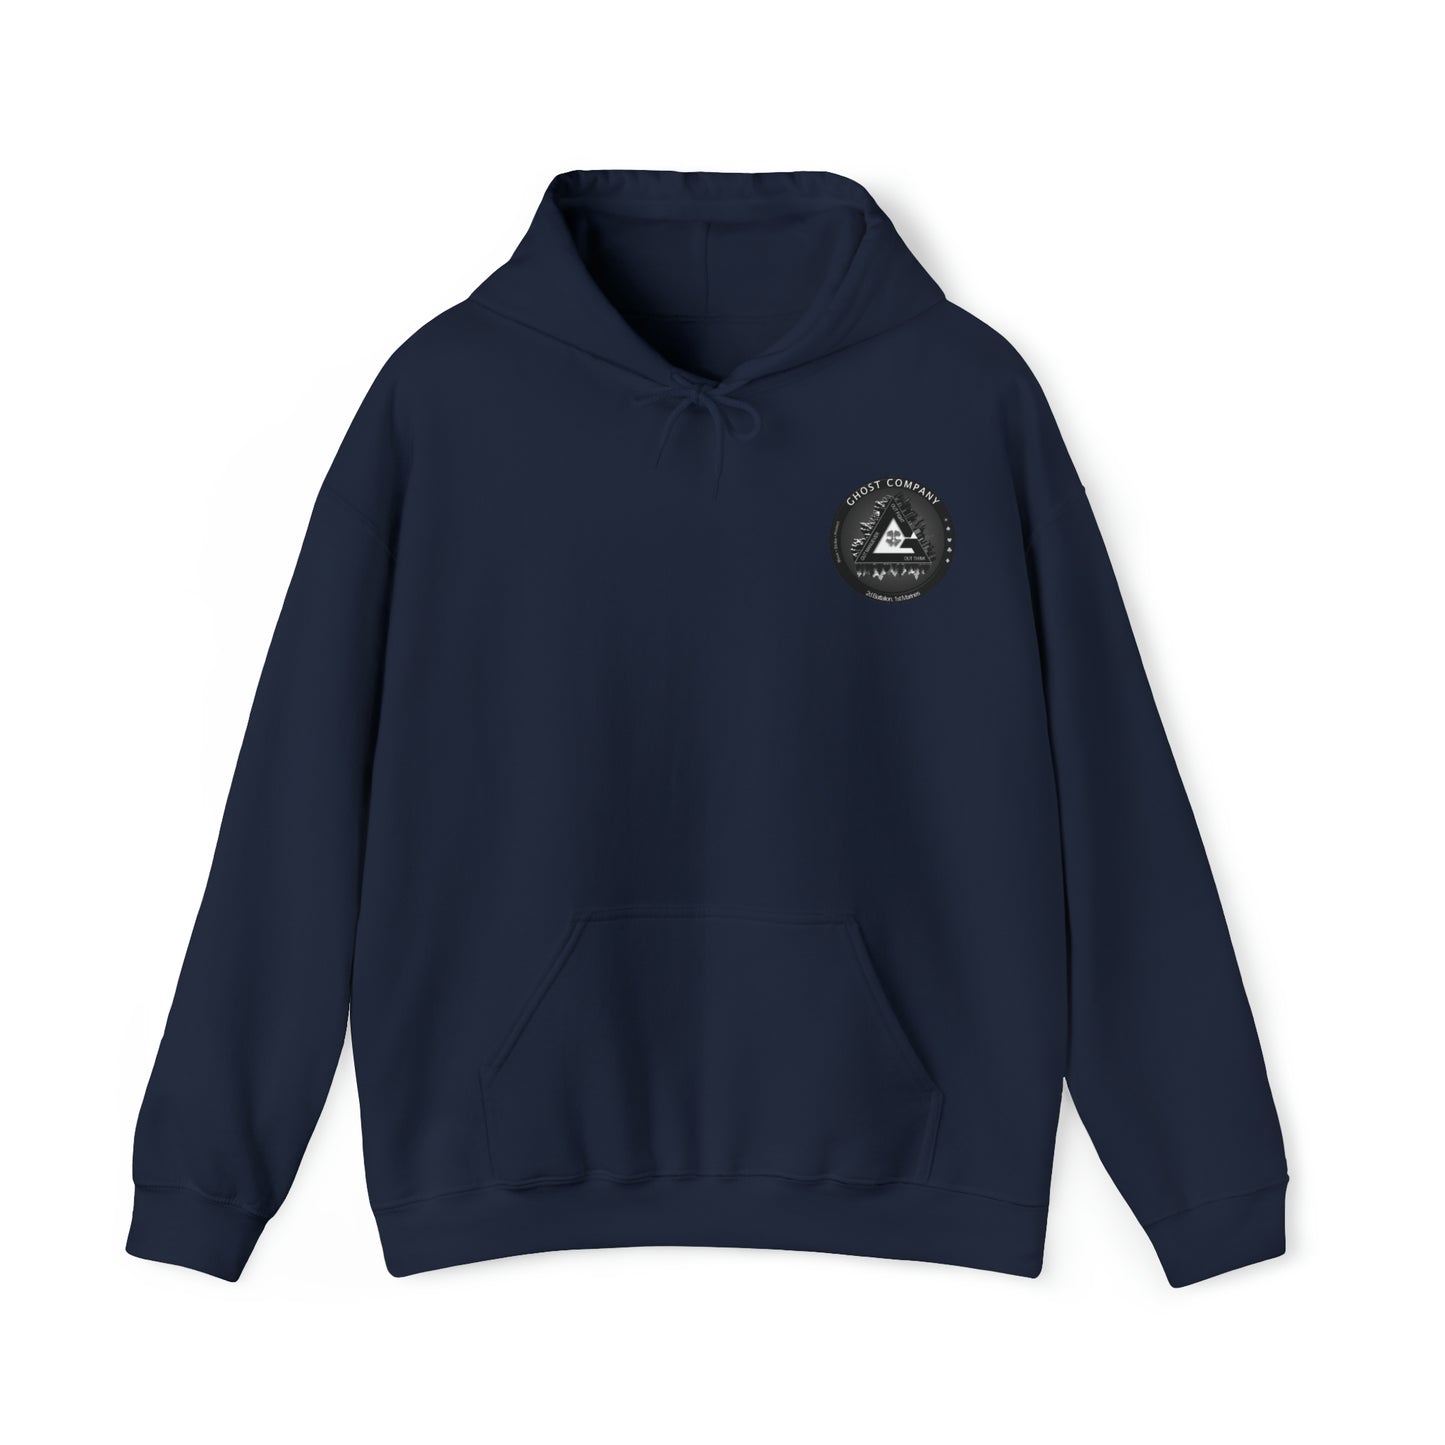 2/1 Ghost Co 2nd Platoon 1st Squad Hoodie